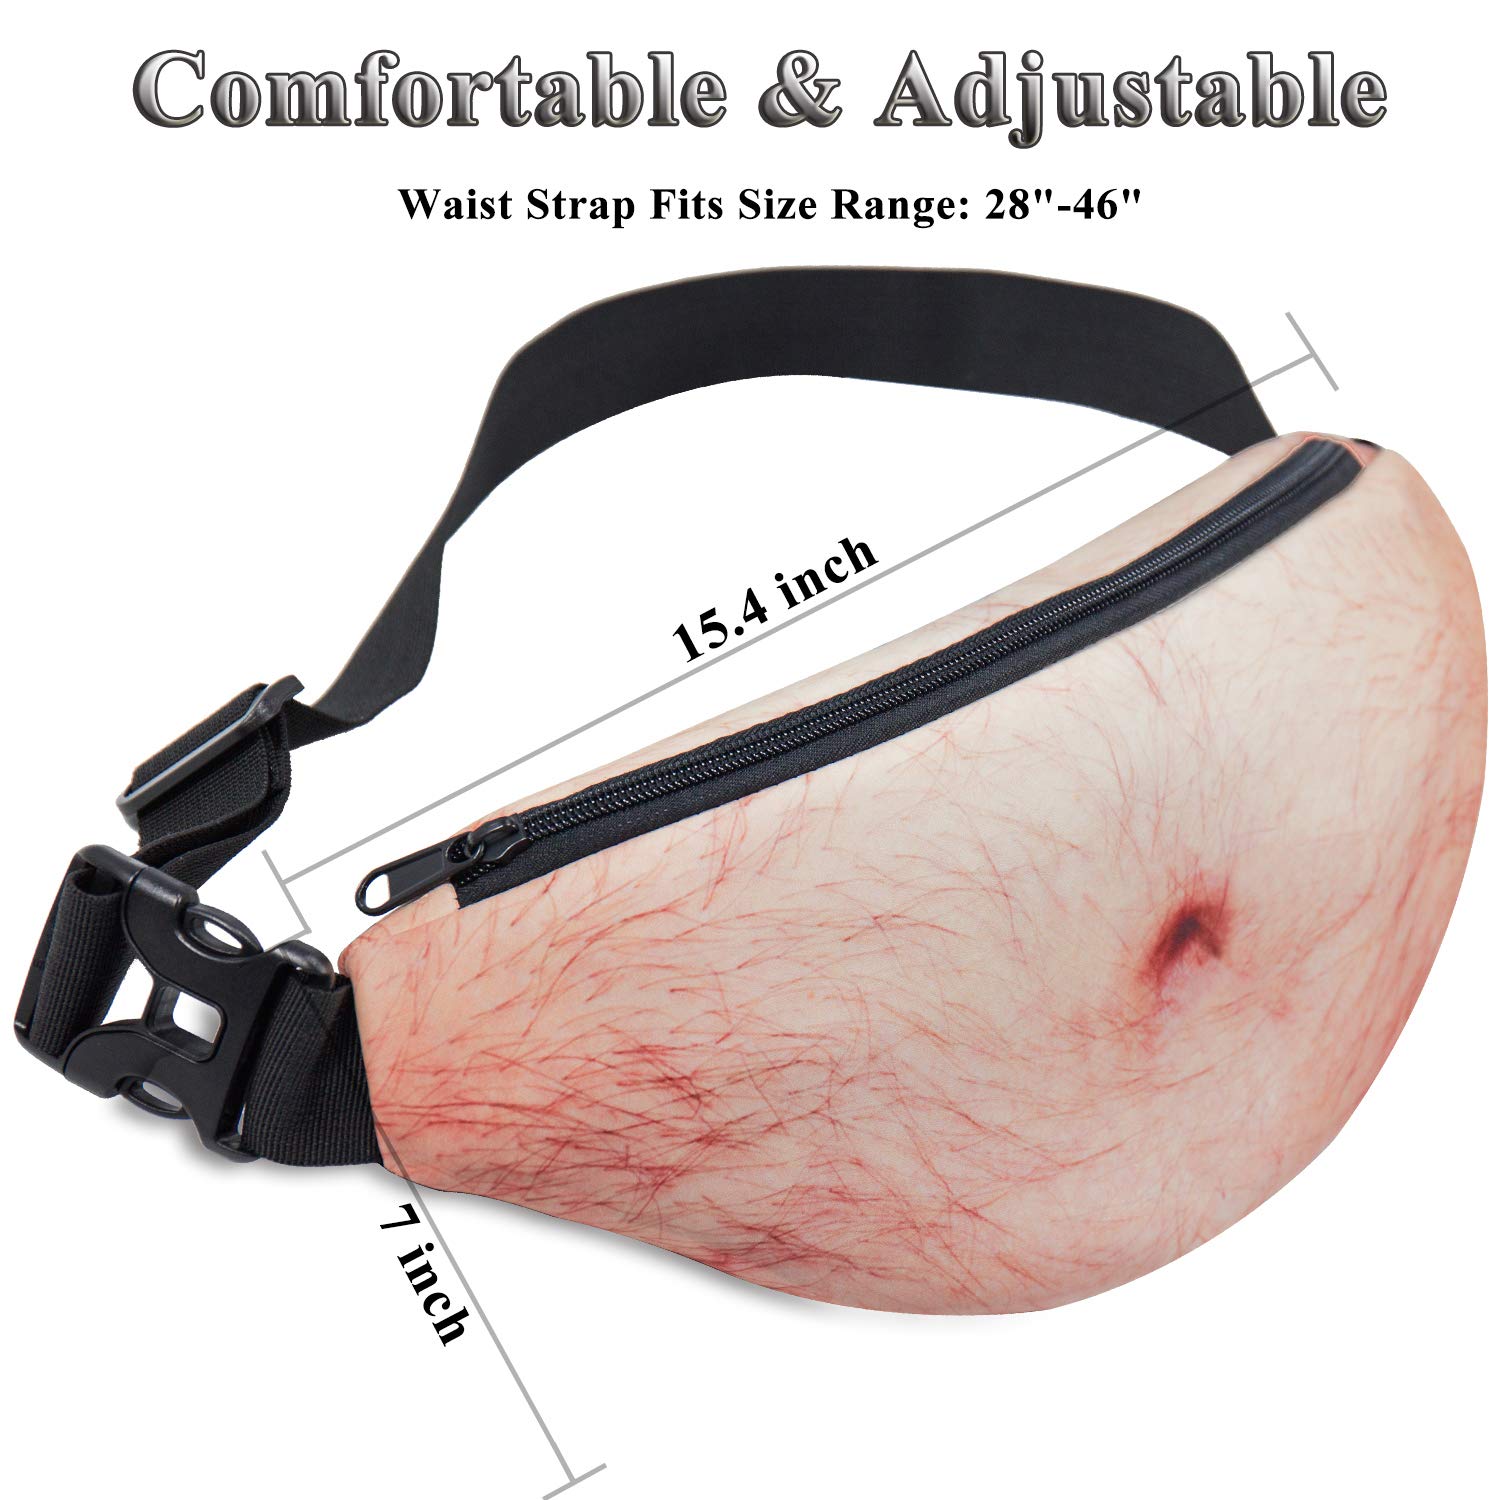 Dad Bag Fanny Pack,Funny Gag Gifts 3D Beer Belly Waist Packs for Christmas,White Elephant Gift Exchange